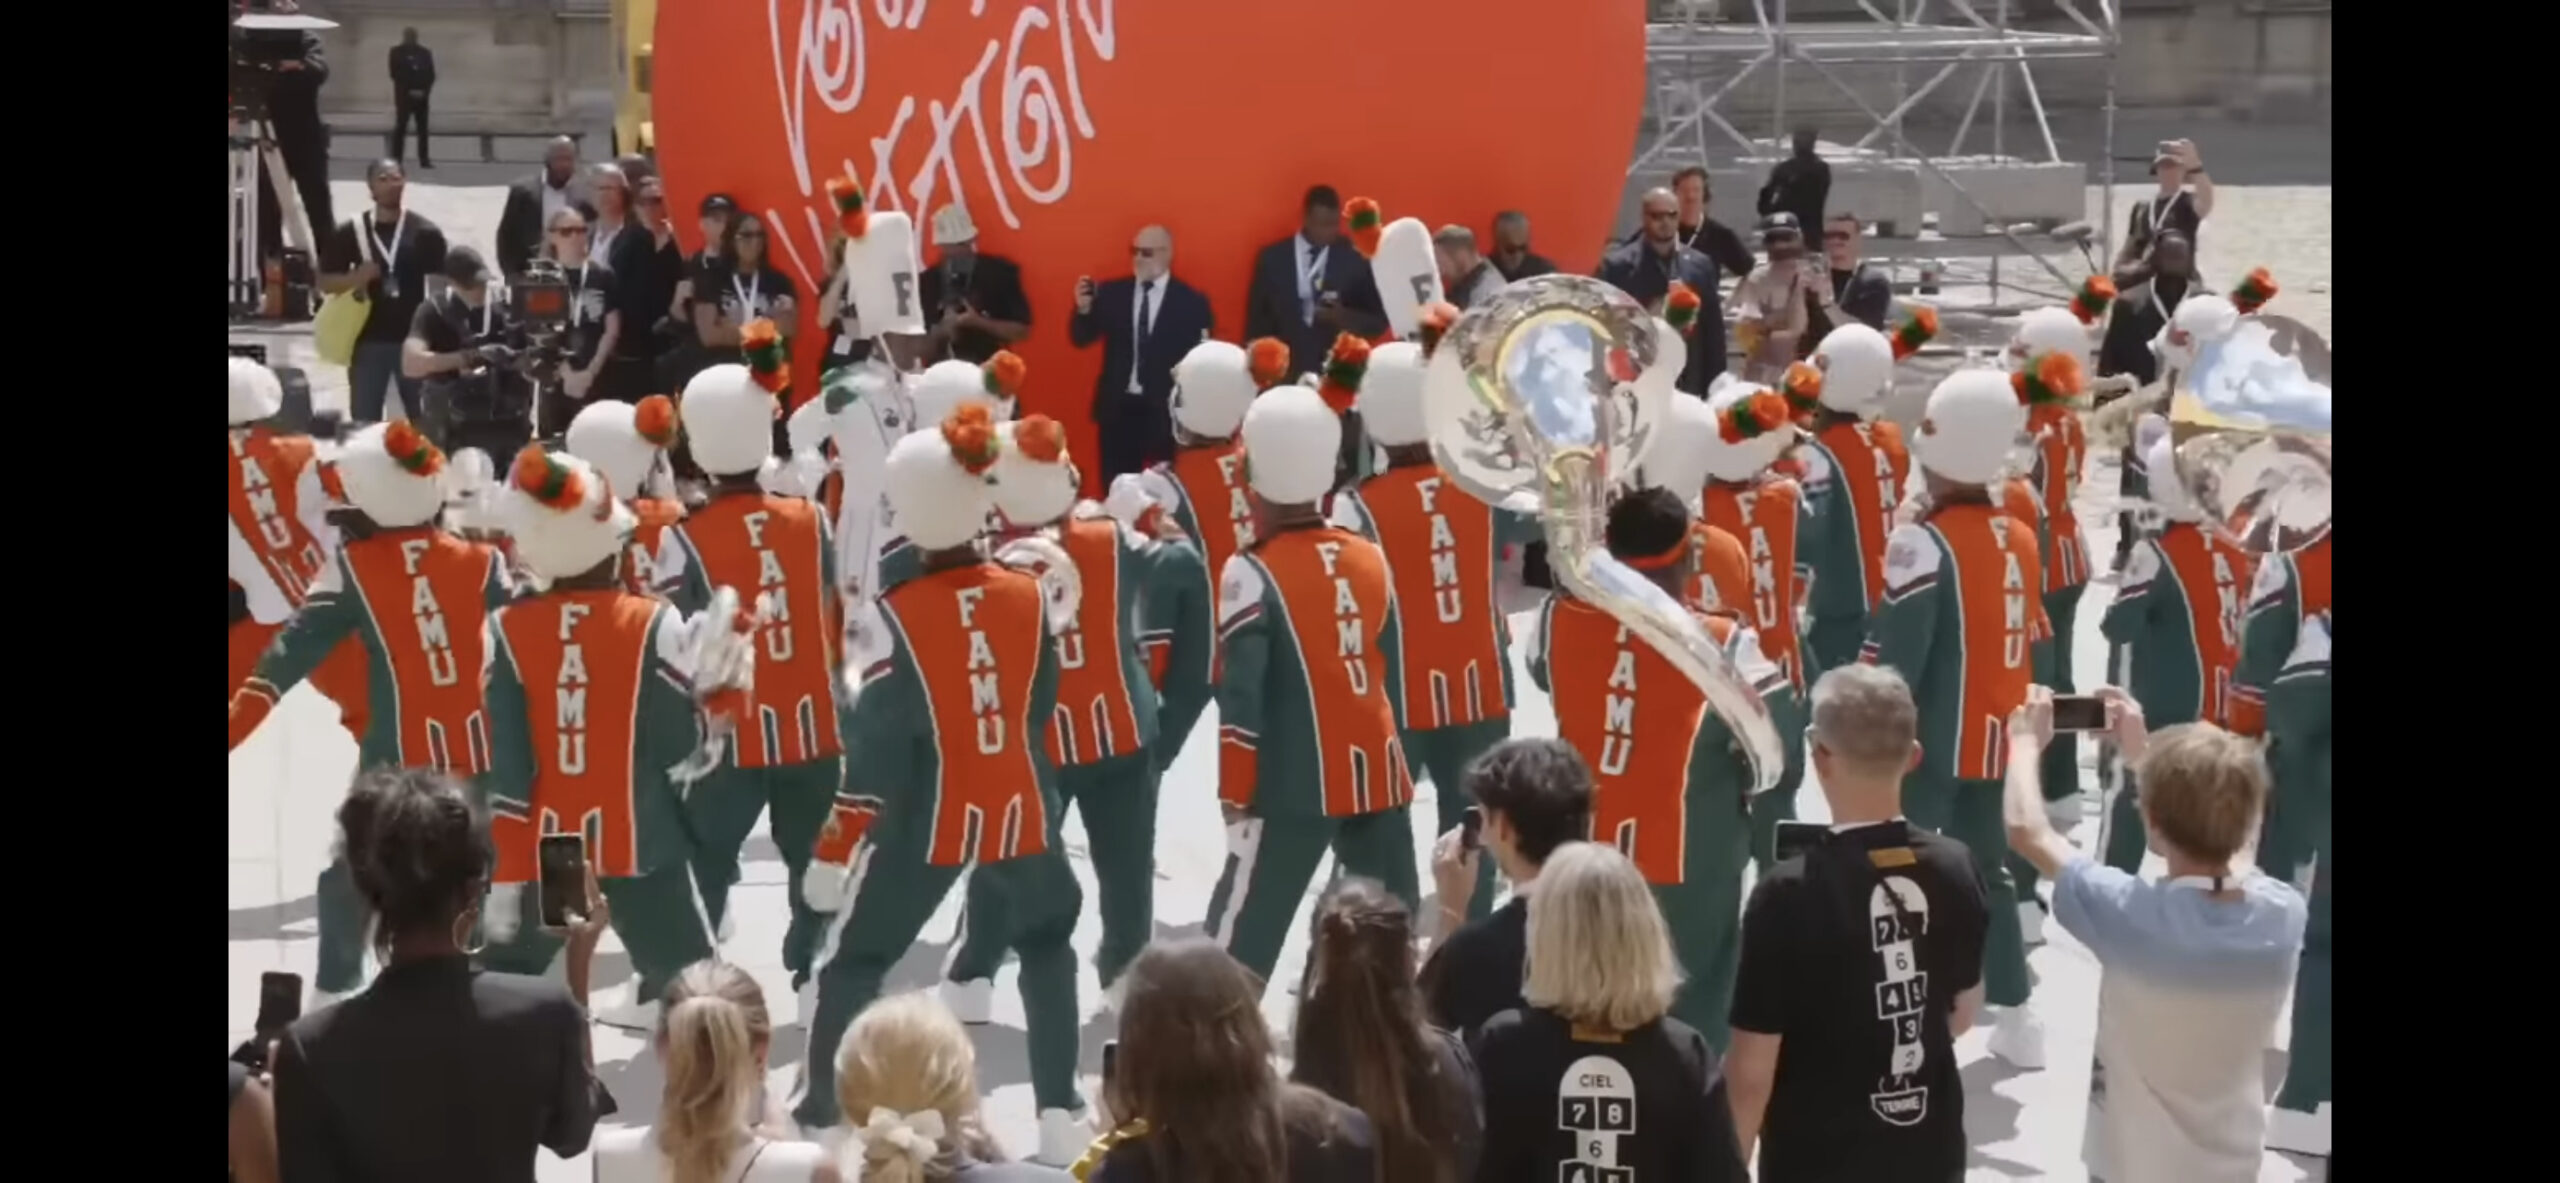 Louis Vuitton Men's Show Featured a Marching Band and Kendrick